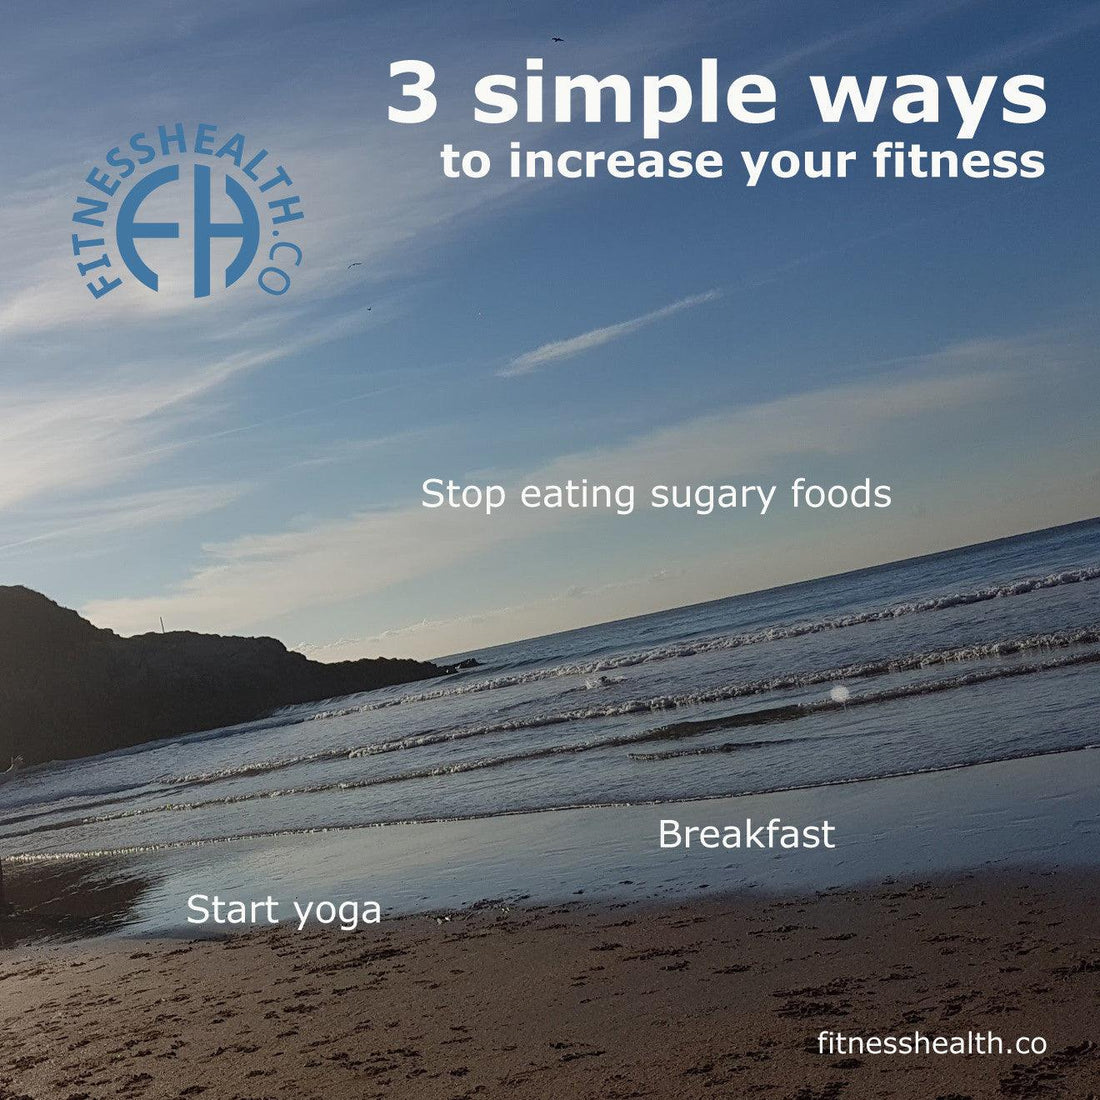 Three simple ways to increase your fitness